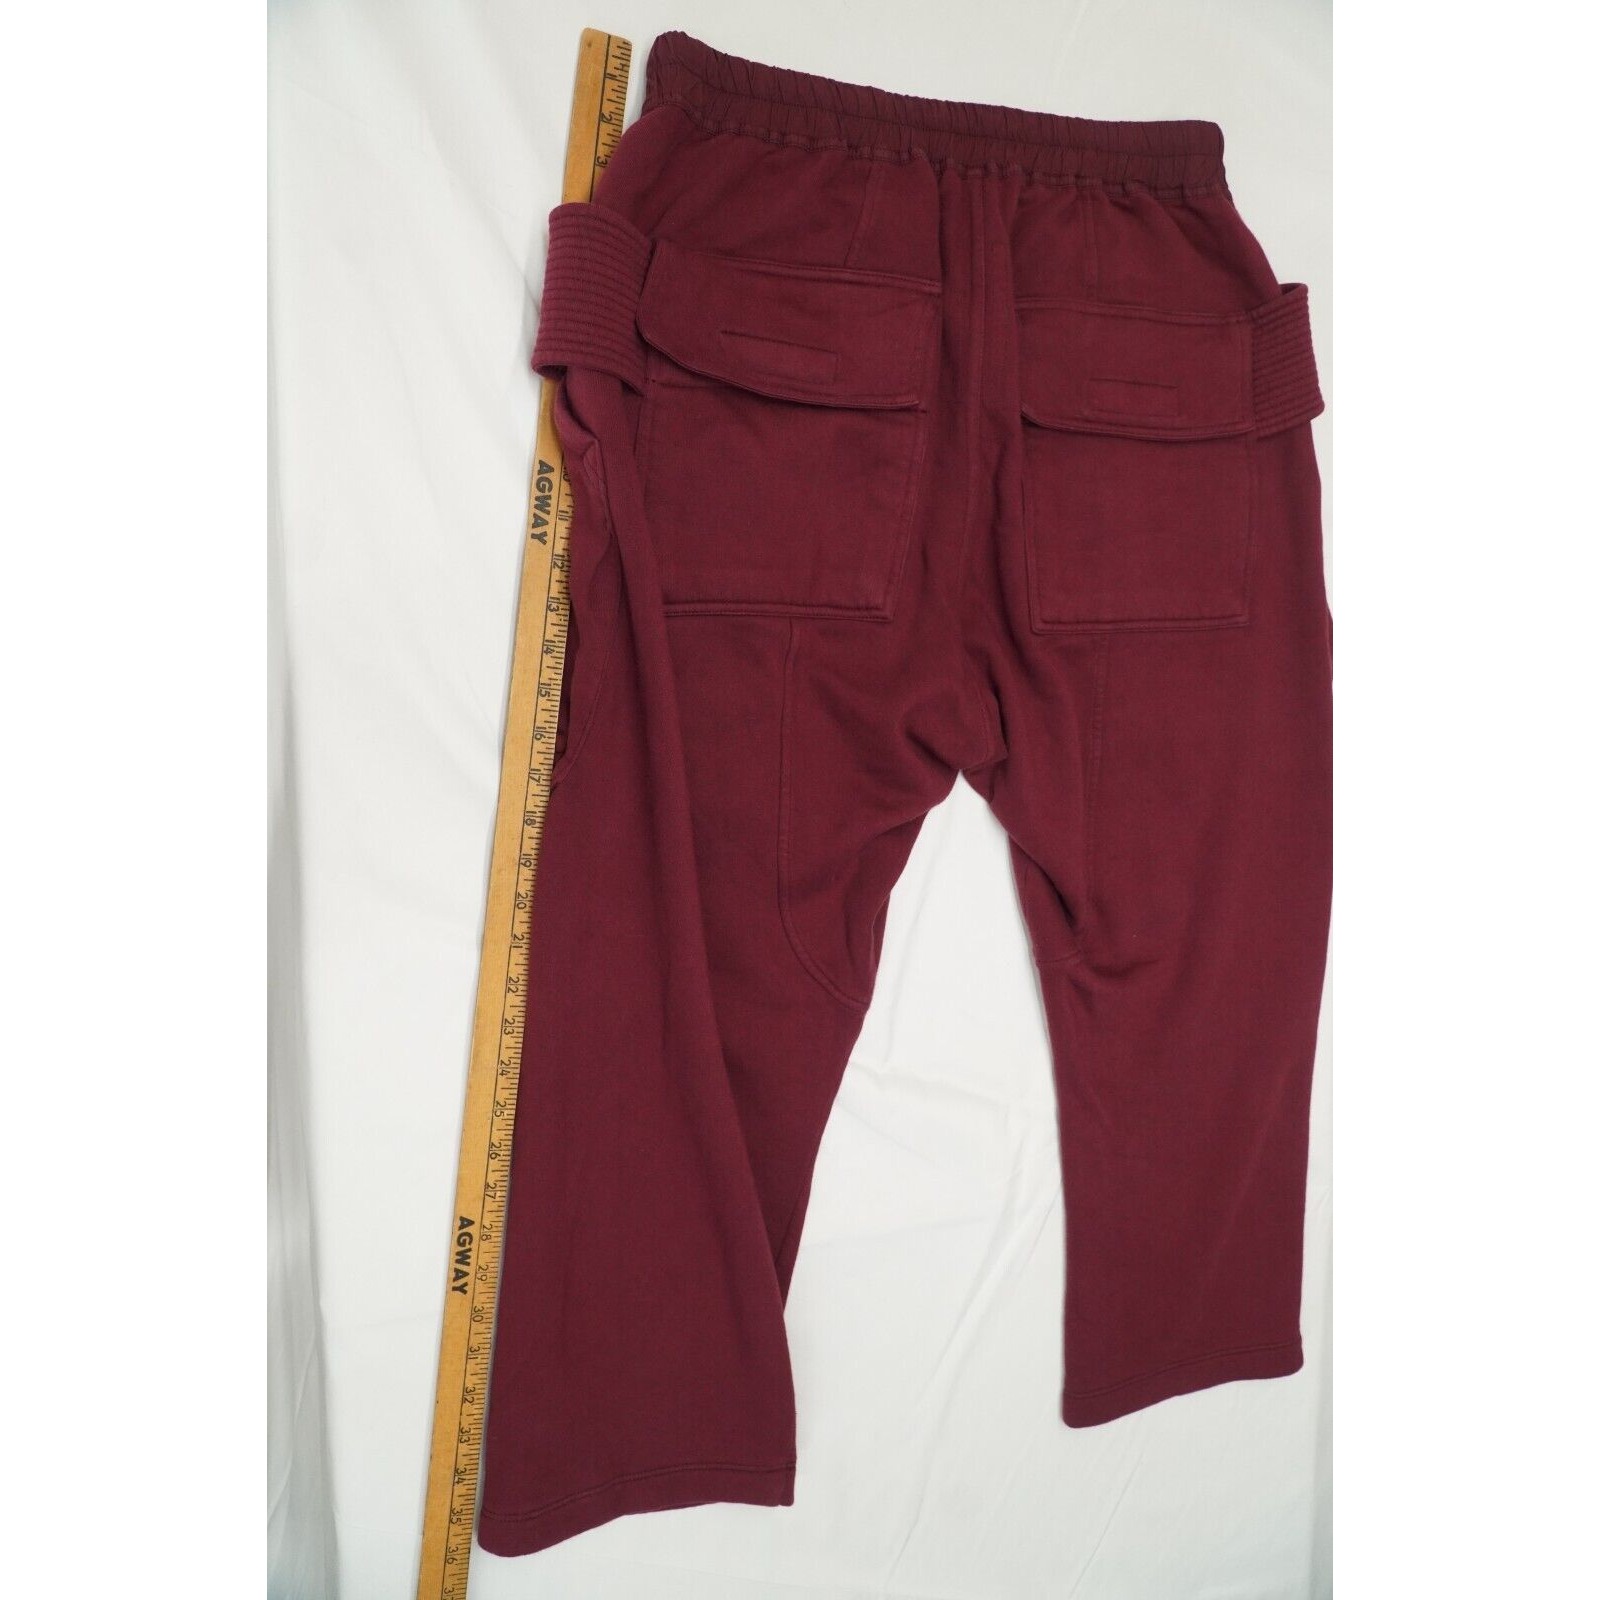 Rick Creatch Cargo Cropped Sweatpant Bruise Red FW20 - 18